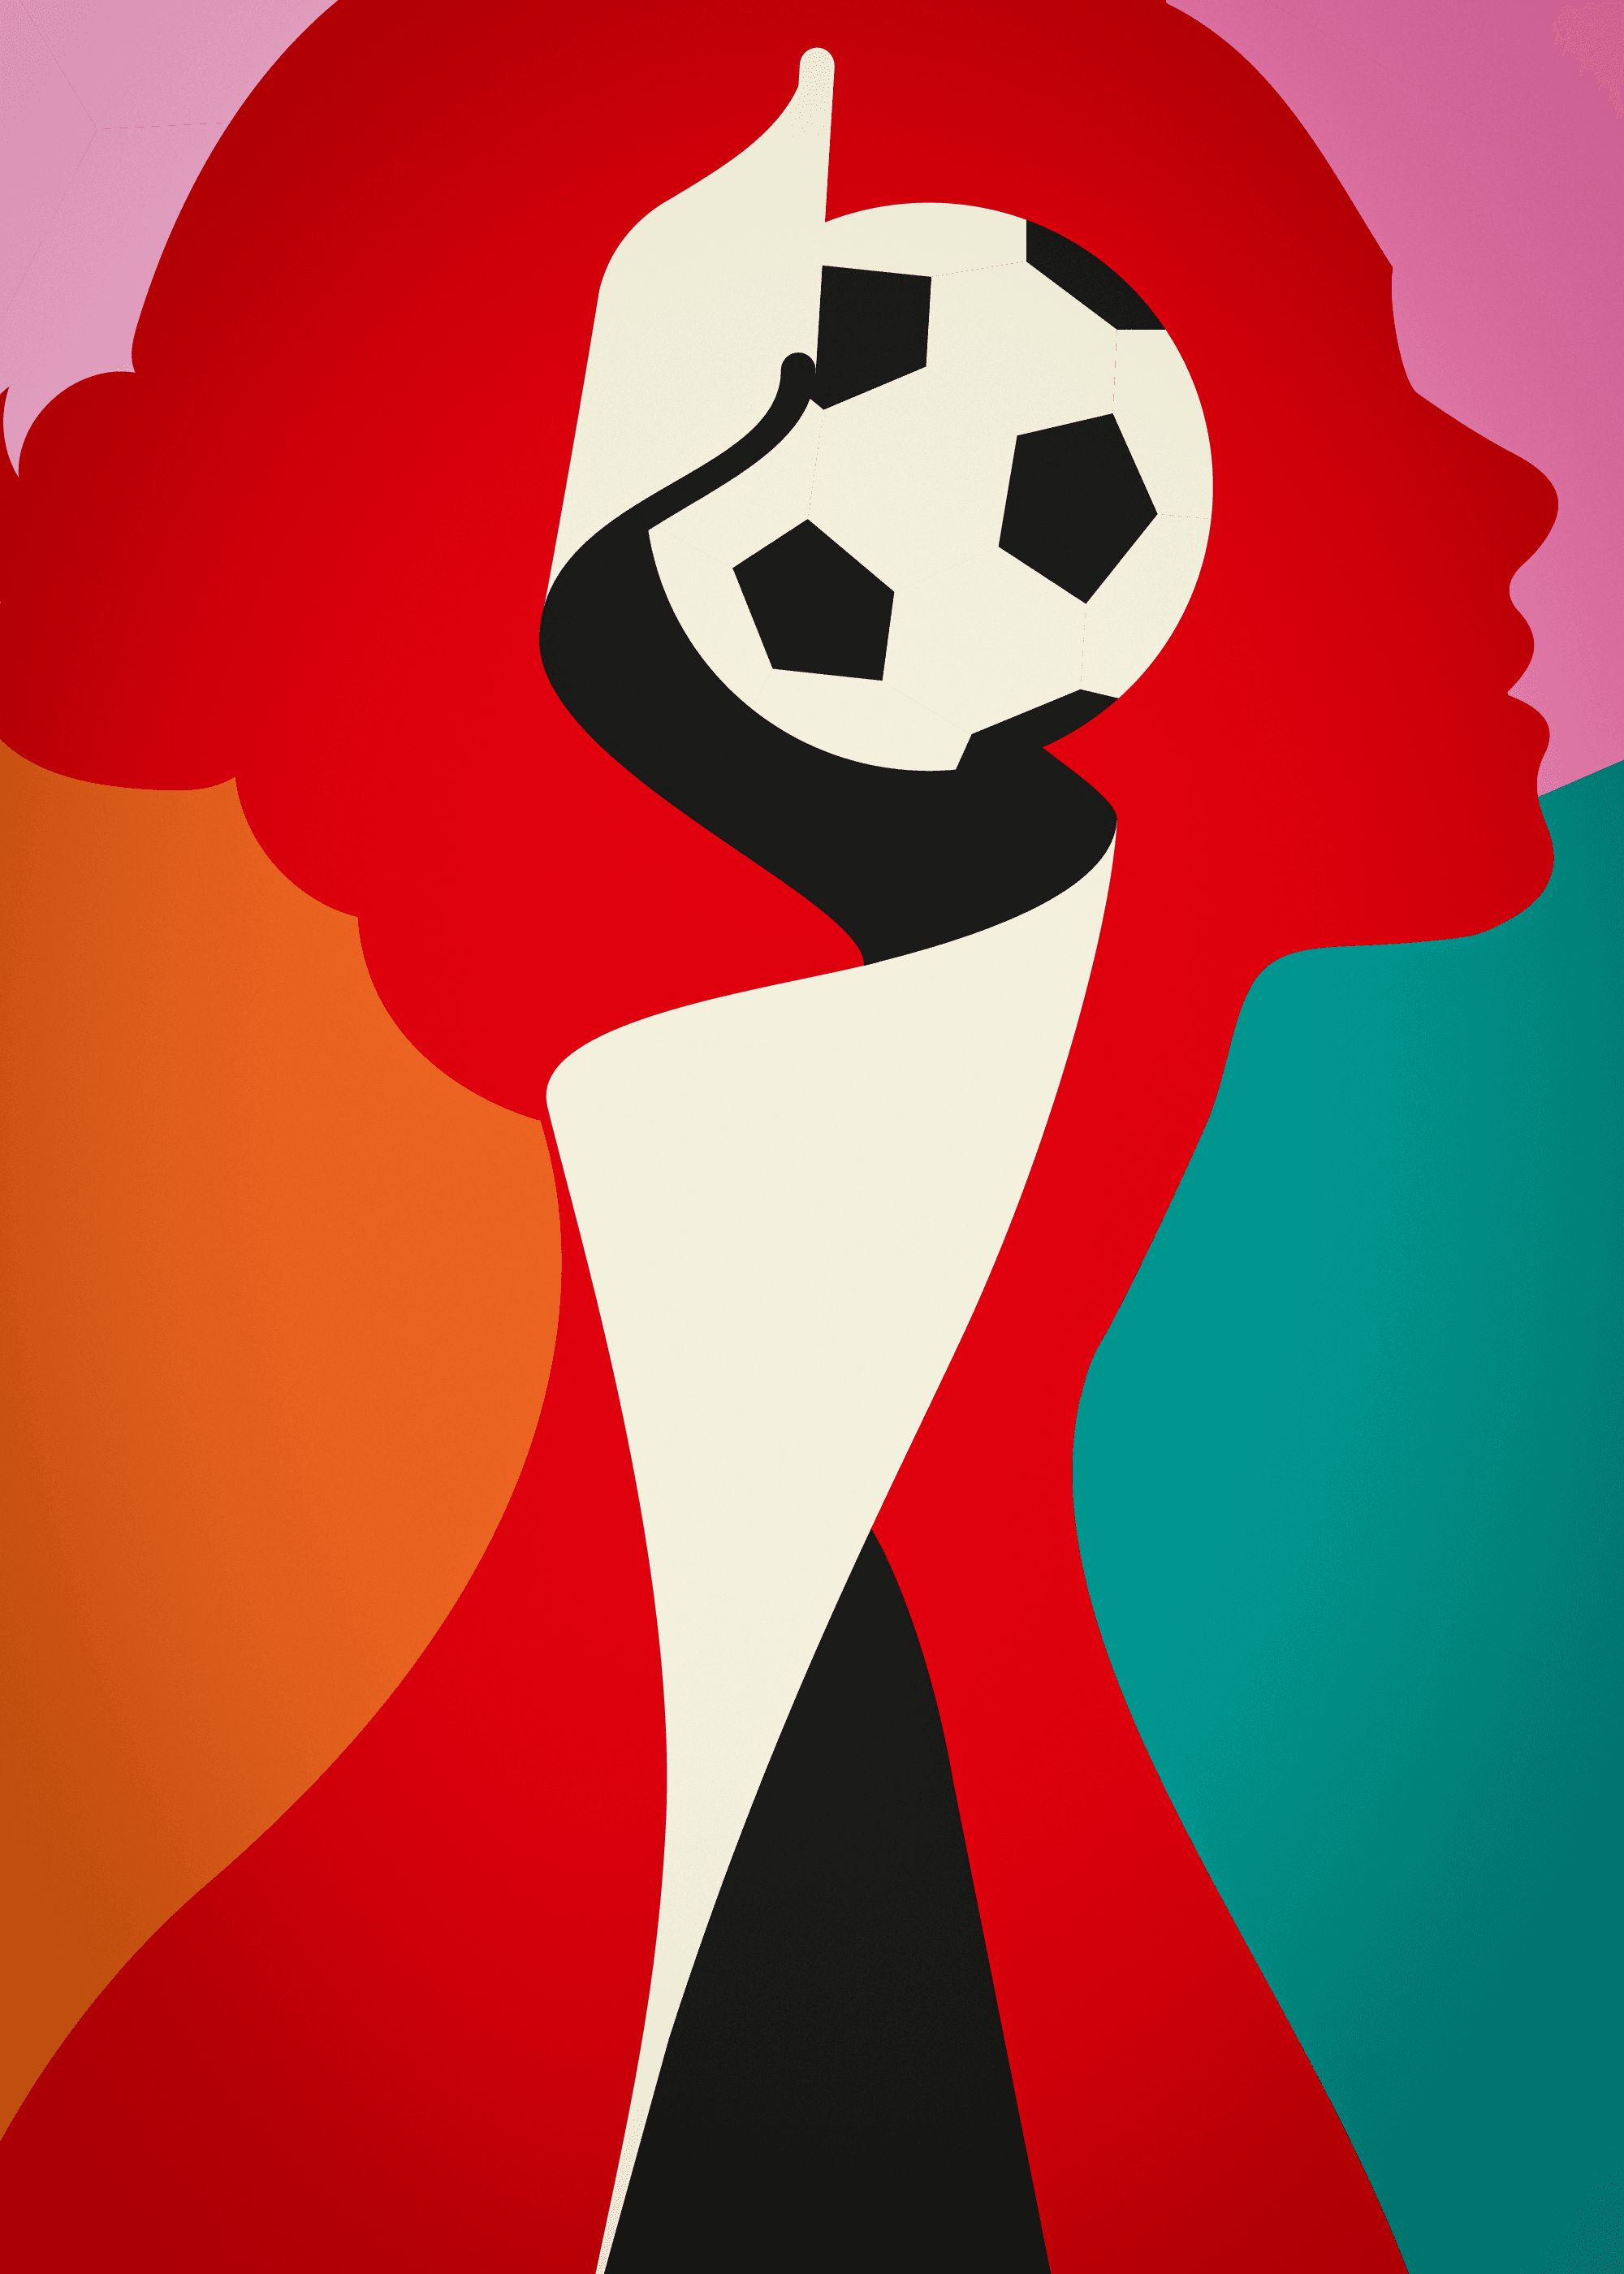 FIFA Women's World Cup 2023 Posters - FIFA+ Collect